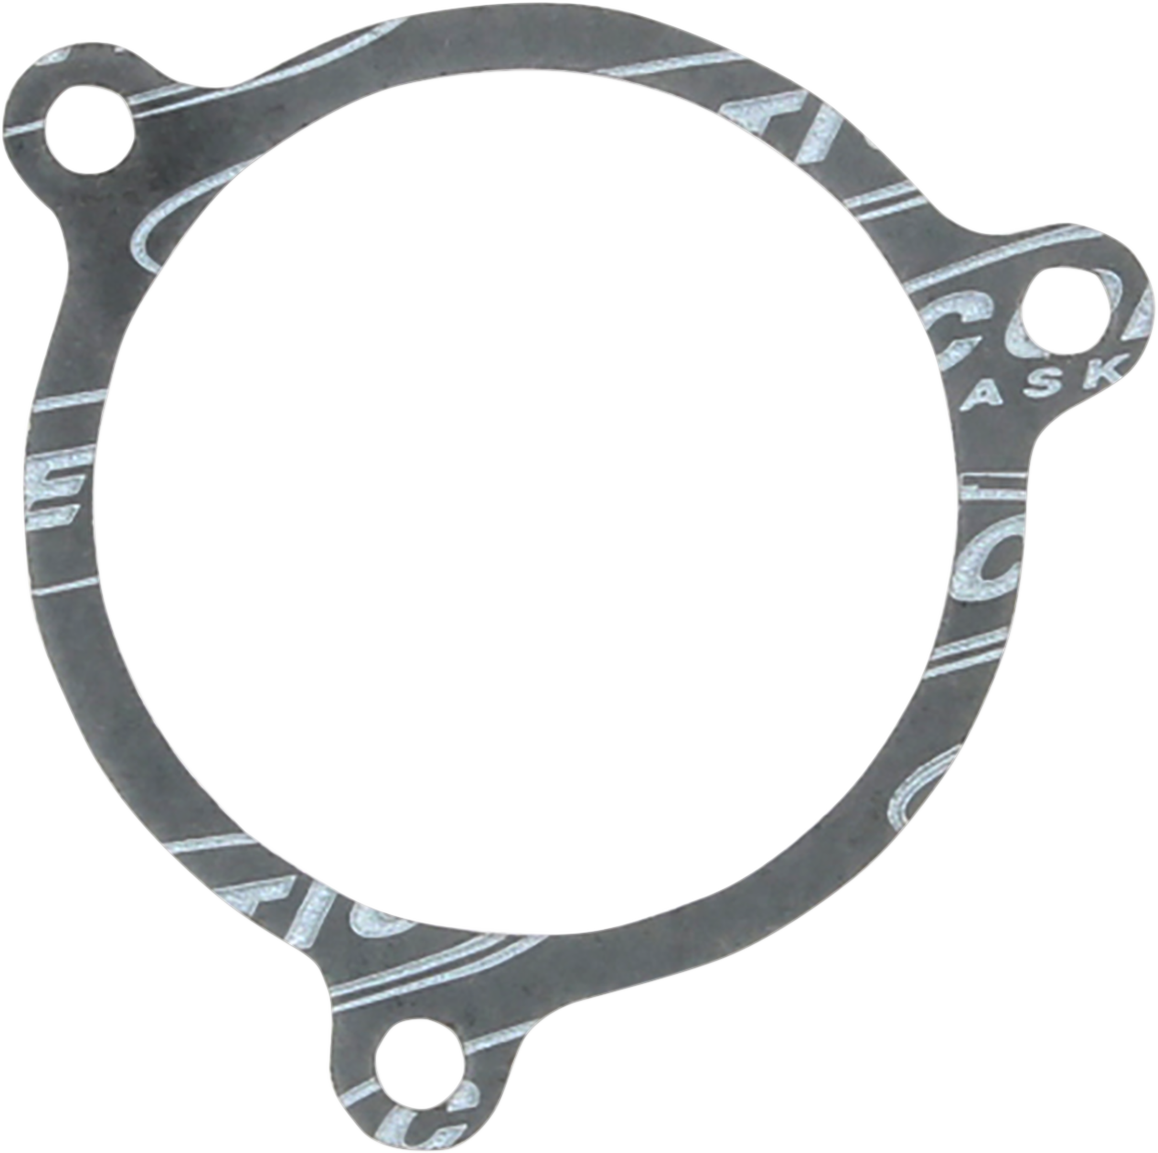 Cometic Single Airbox/Throttle Body Motorcycle Gasket 2017-2020 Harley Touring